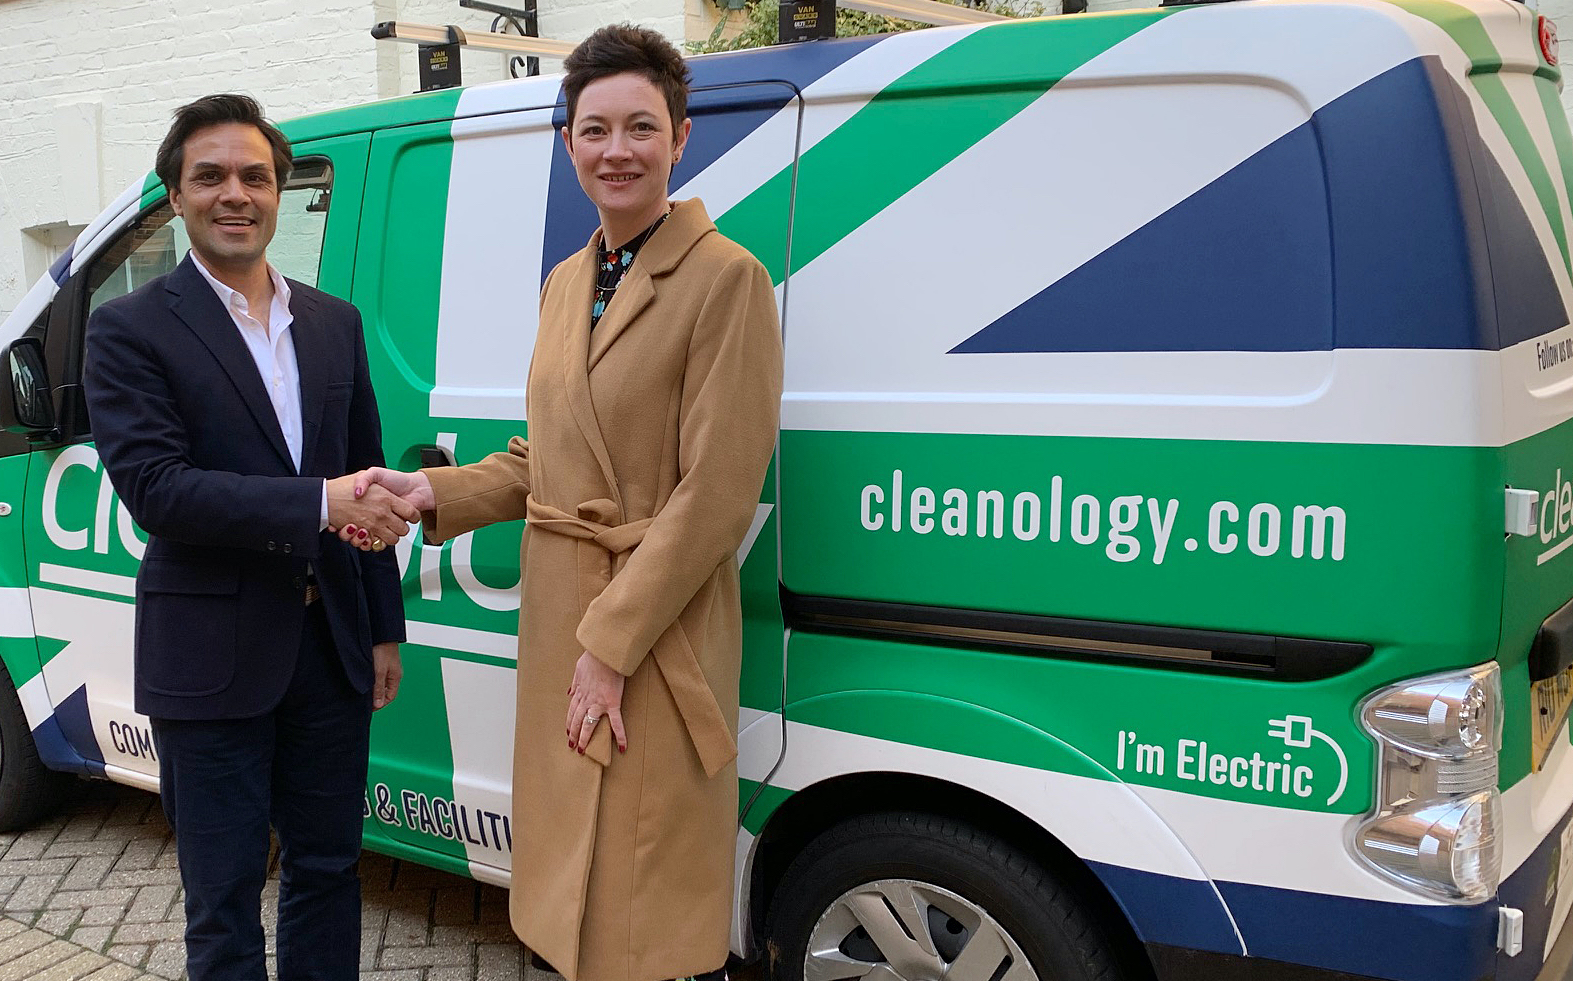 Cleanology’s new hire makes the news on a major scale